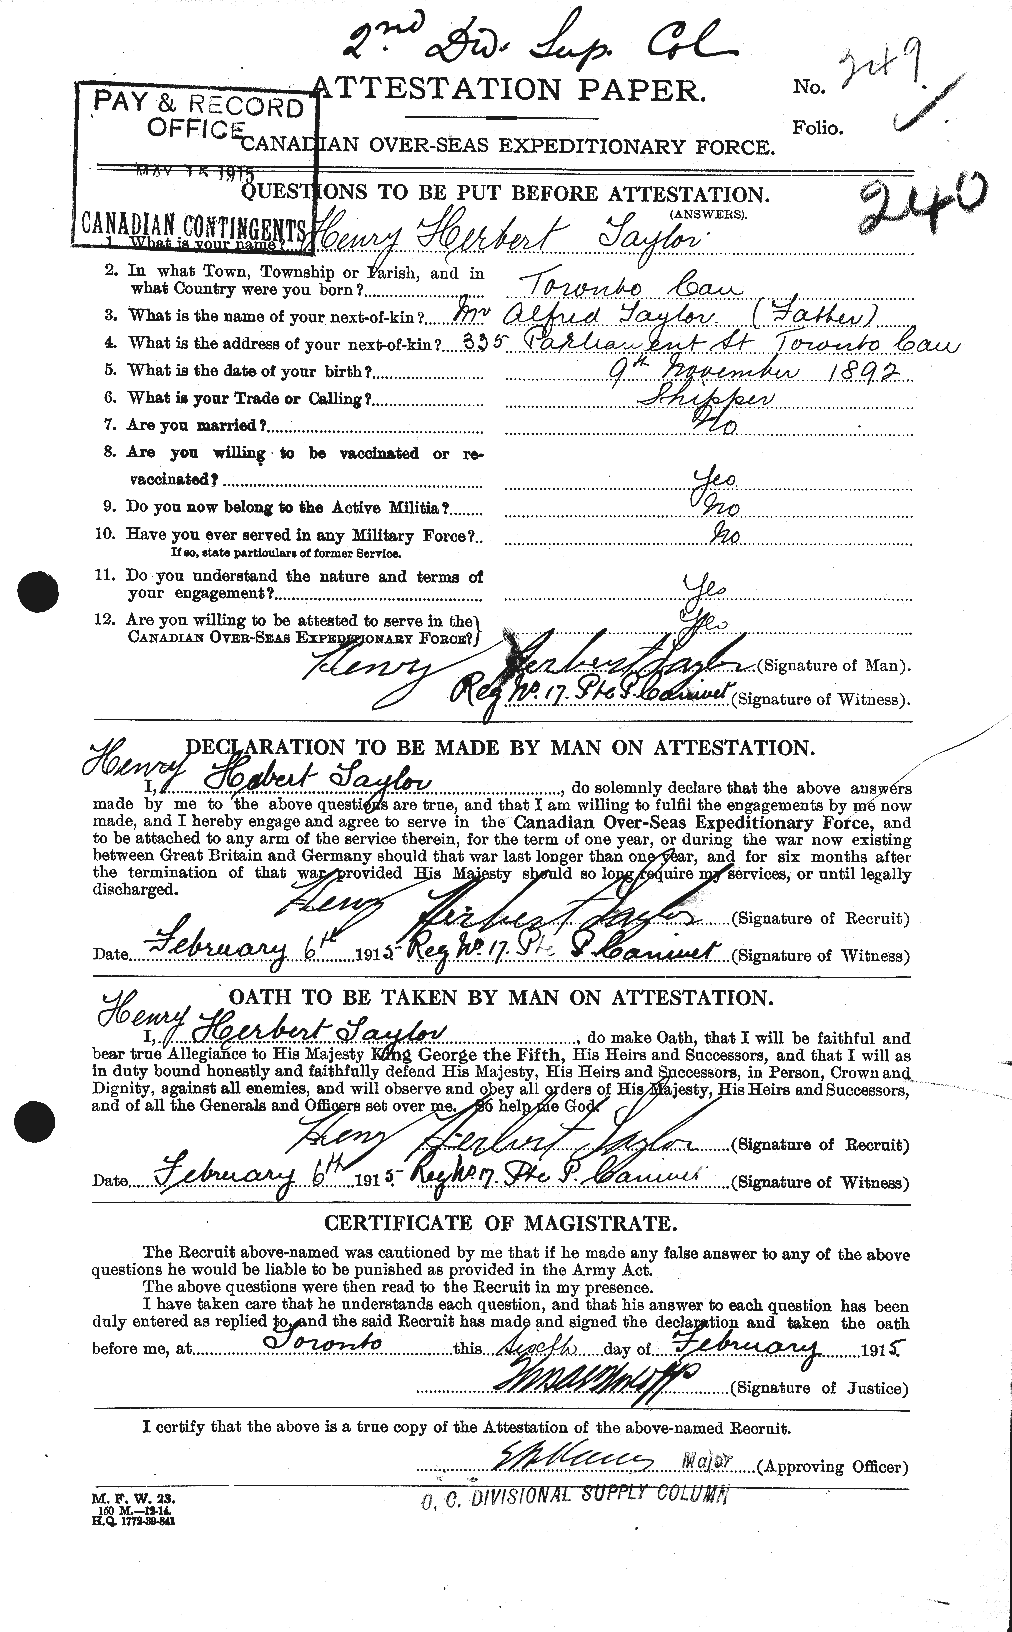 Personnel Records of the First World War - CEF 626542a